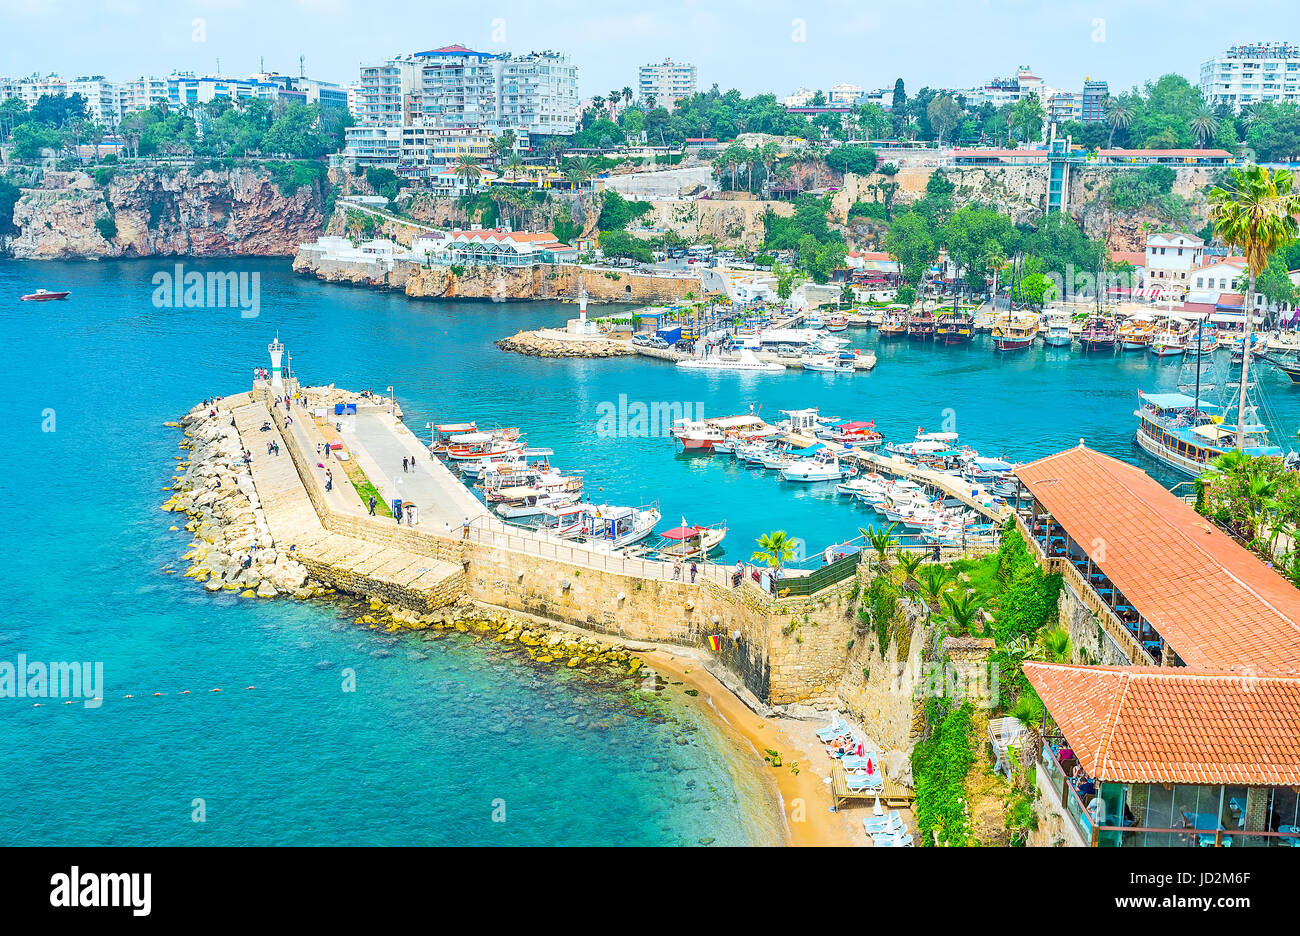 Kaleici district is historic city center with the large port, surrounded by fortress walls and rocky cliffs, Antalya, Turkey. Stock Photo